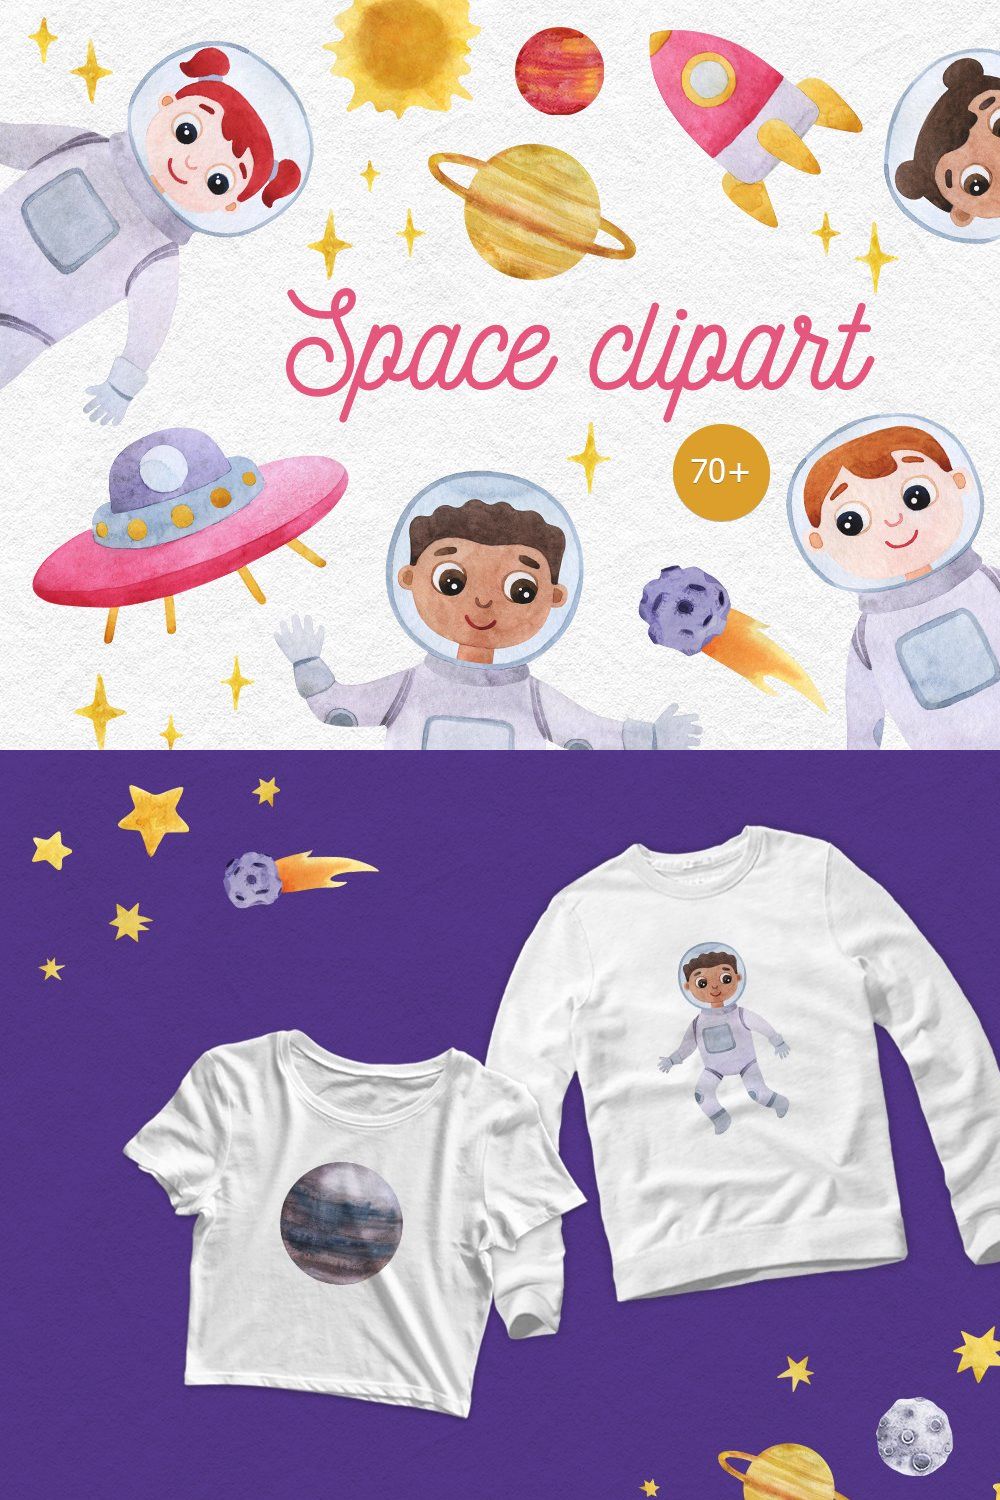 Watercolor space clipart with planet pinterest preview image.